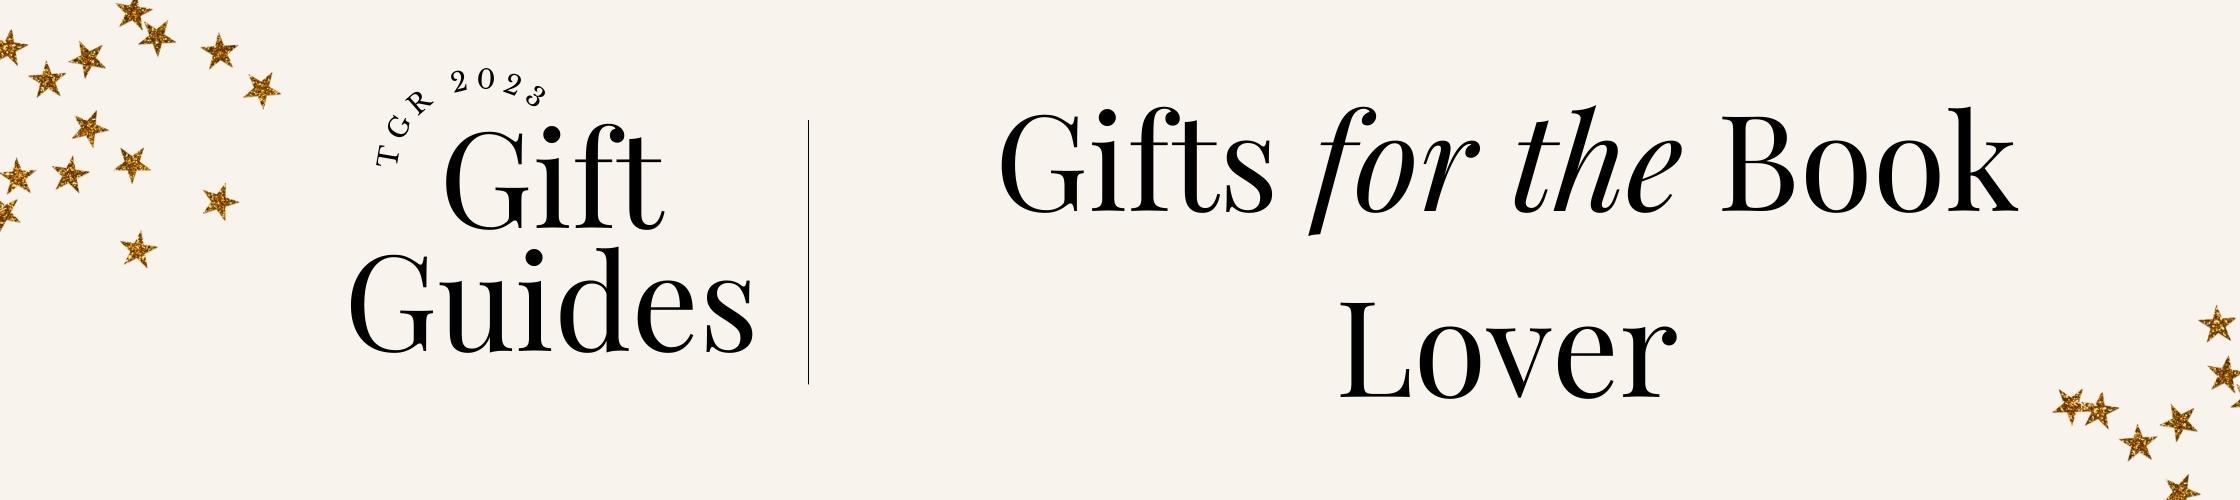 2023 Holiday Gift Guides: Gifts for the Book Lover